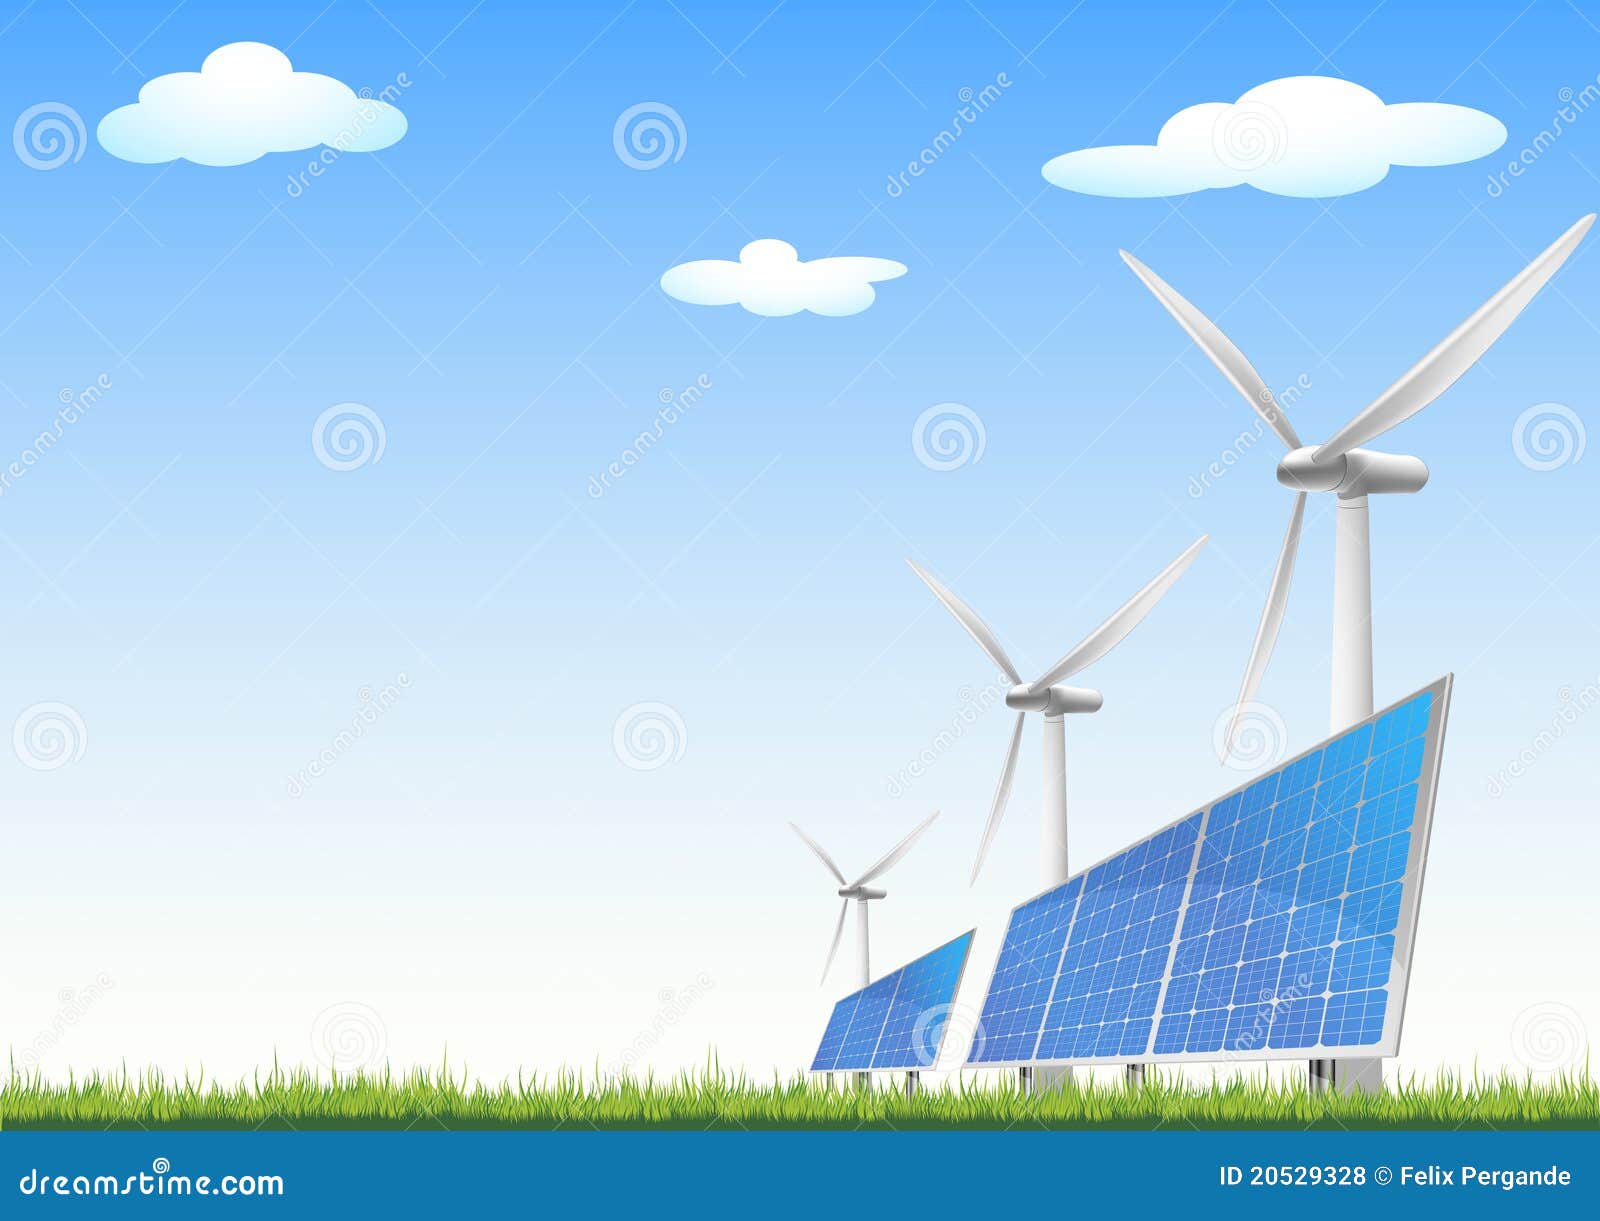 Illustration of panels with solar cells and wind generators on a green 